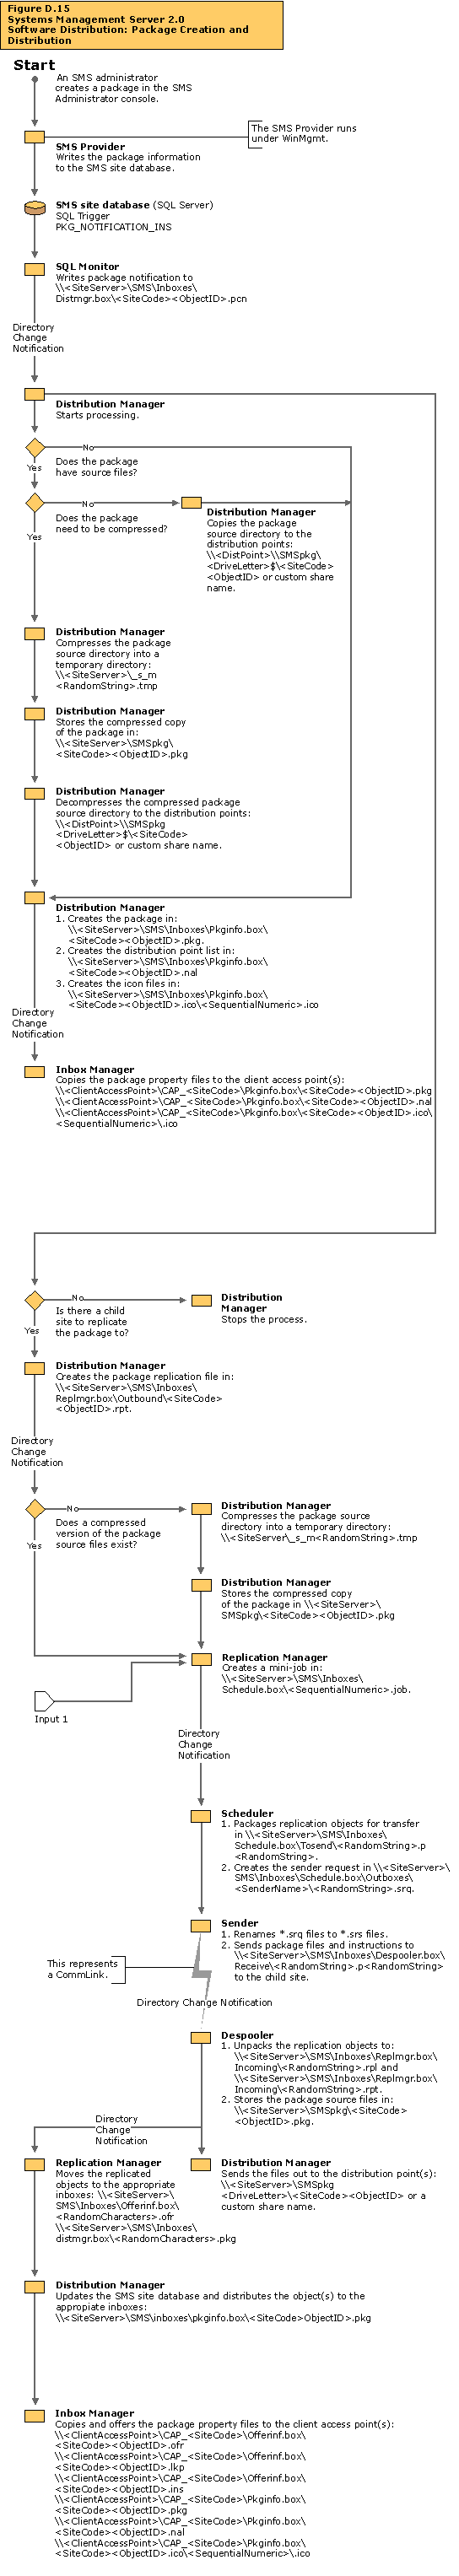 Software Distribution - Package Creation and Distribution flow chart